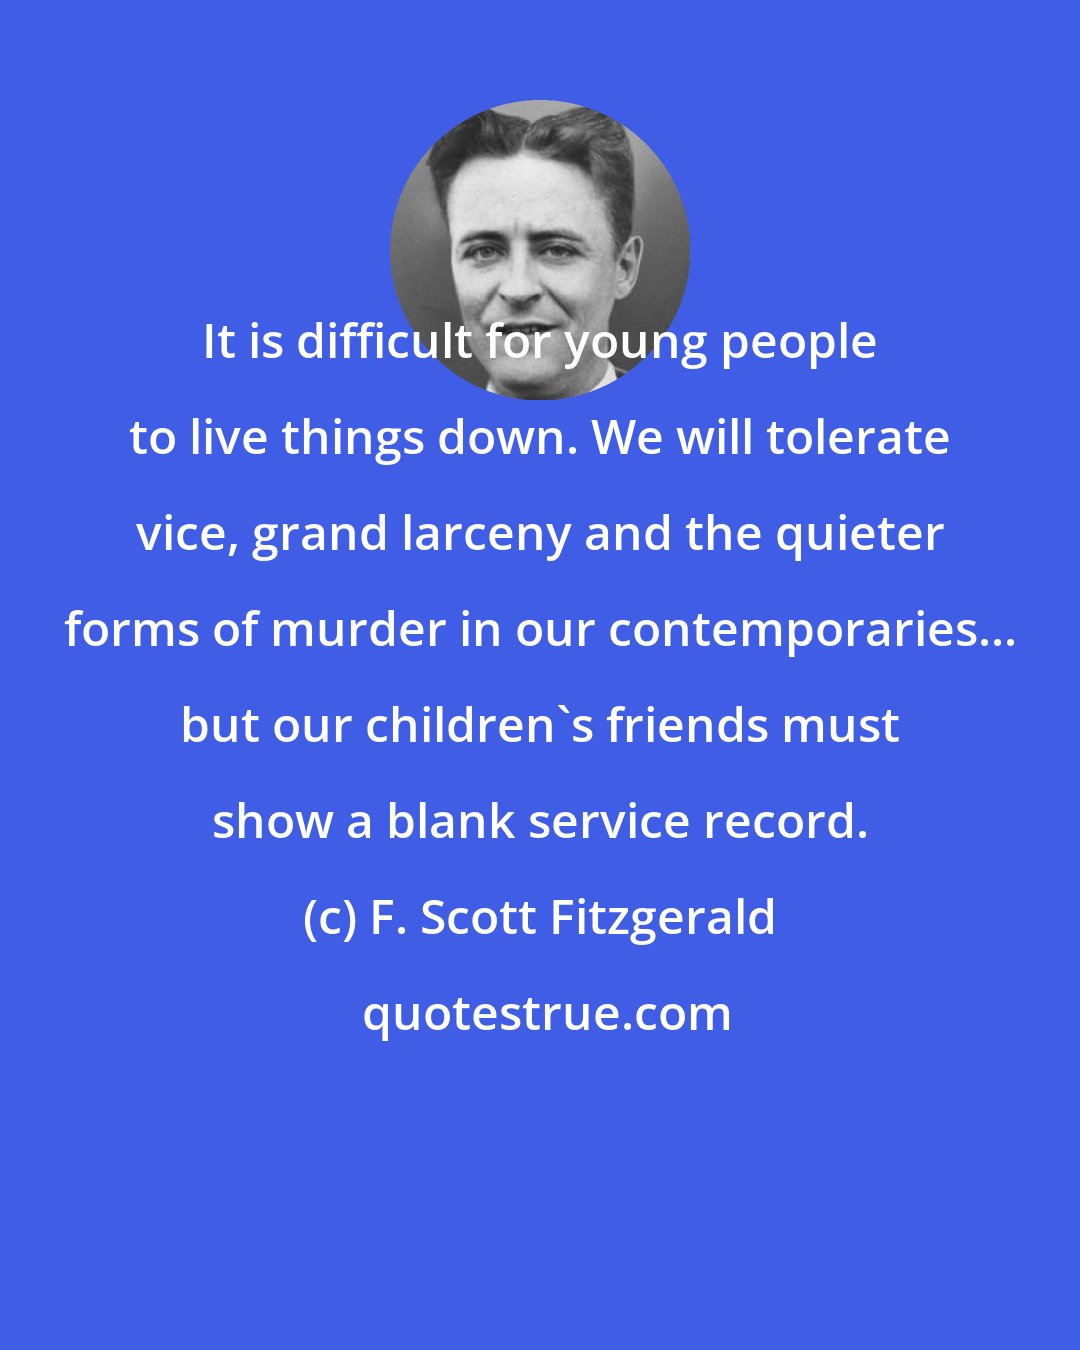 F. Scott Fitzgerald: It is difficult for young people to live things down. We will tolerate vice, grand larceny and the quieter forms of murder in our contemporaries... but our children's friends must show a blank service record.